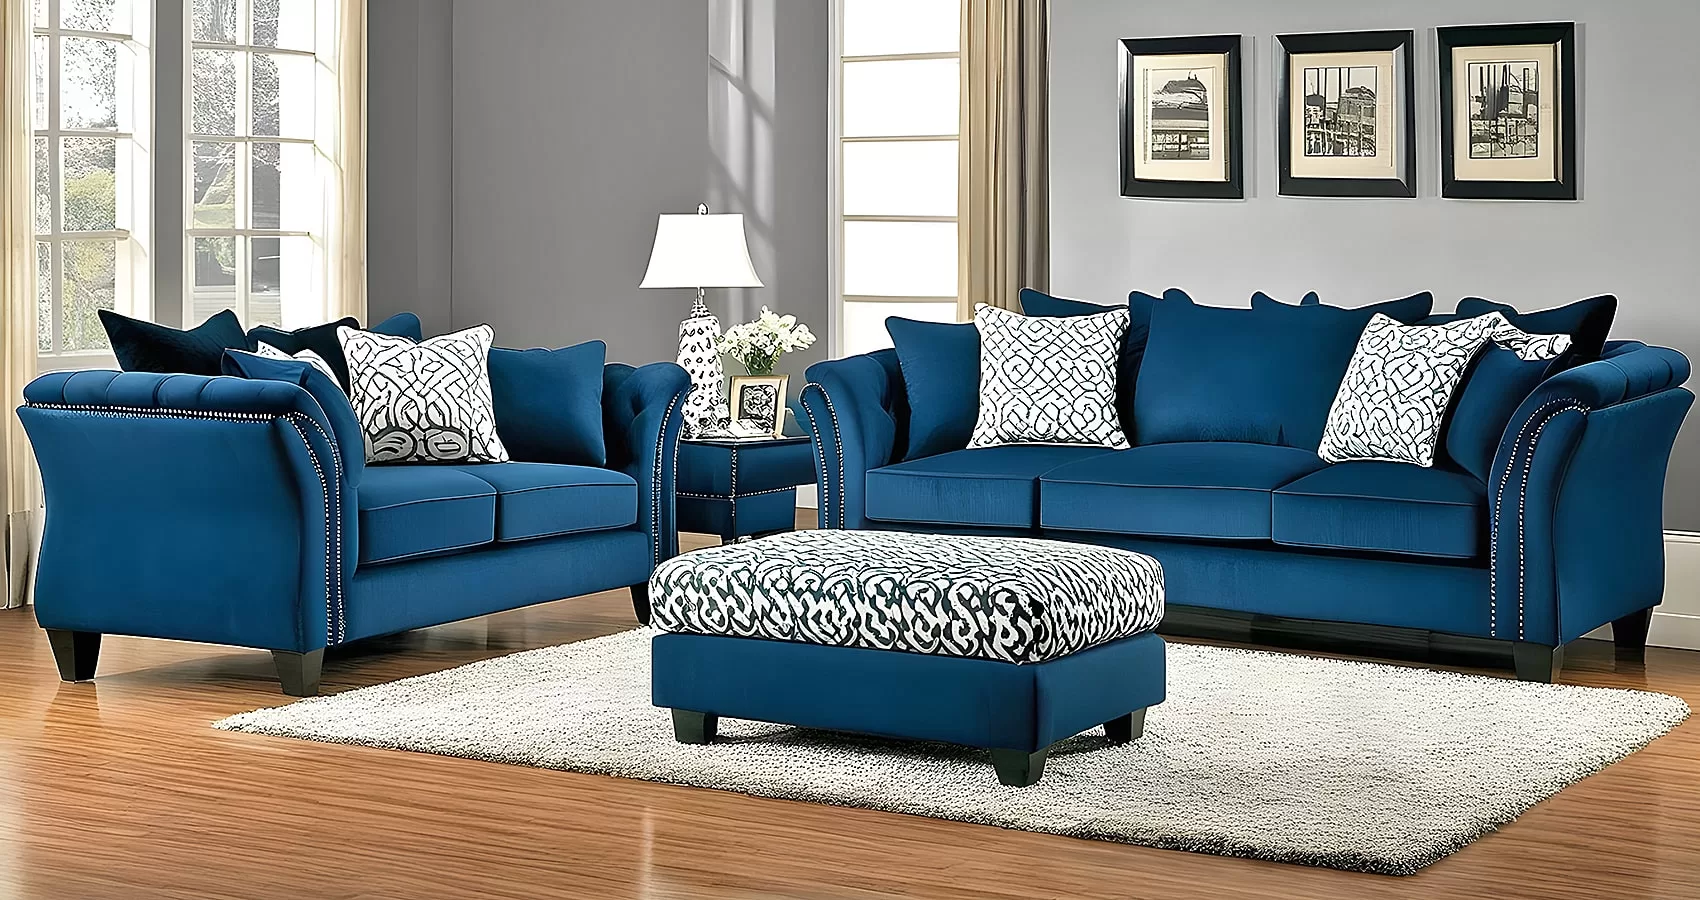 Blue Couch Rug Ideas